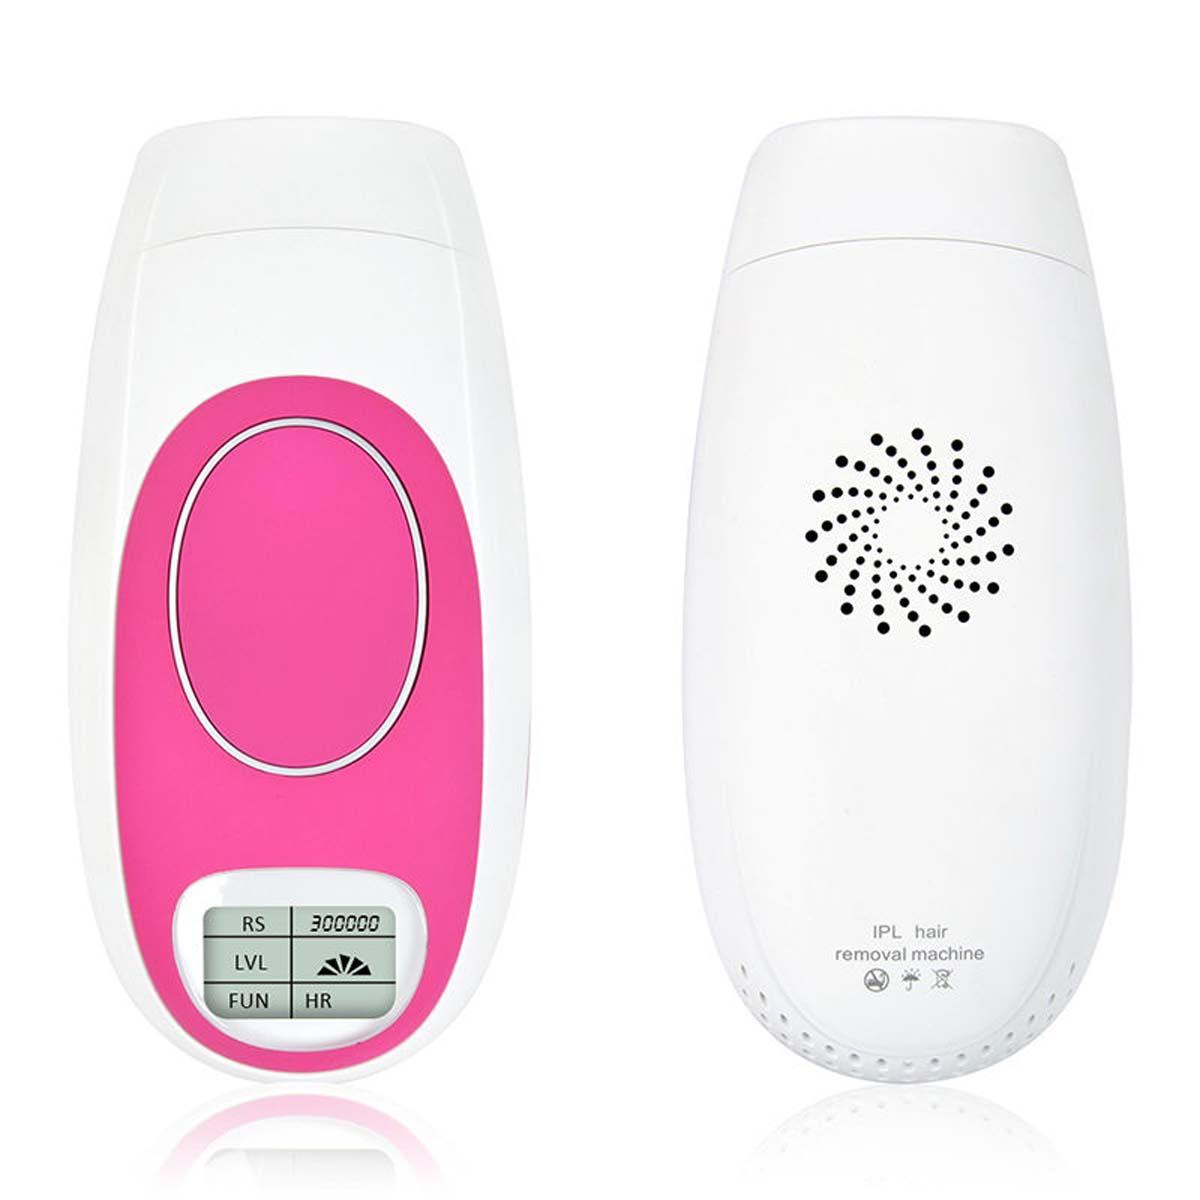 Replacement-Lamp-For-Laser-IPL-Permanent-Hair-Removal-Machine-For-Face-and-Body-1234232-1